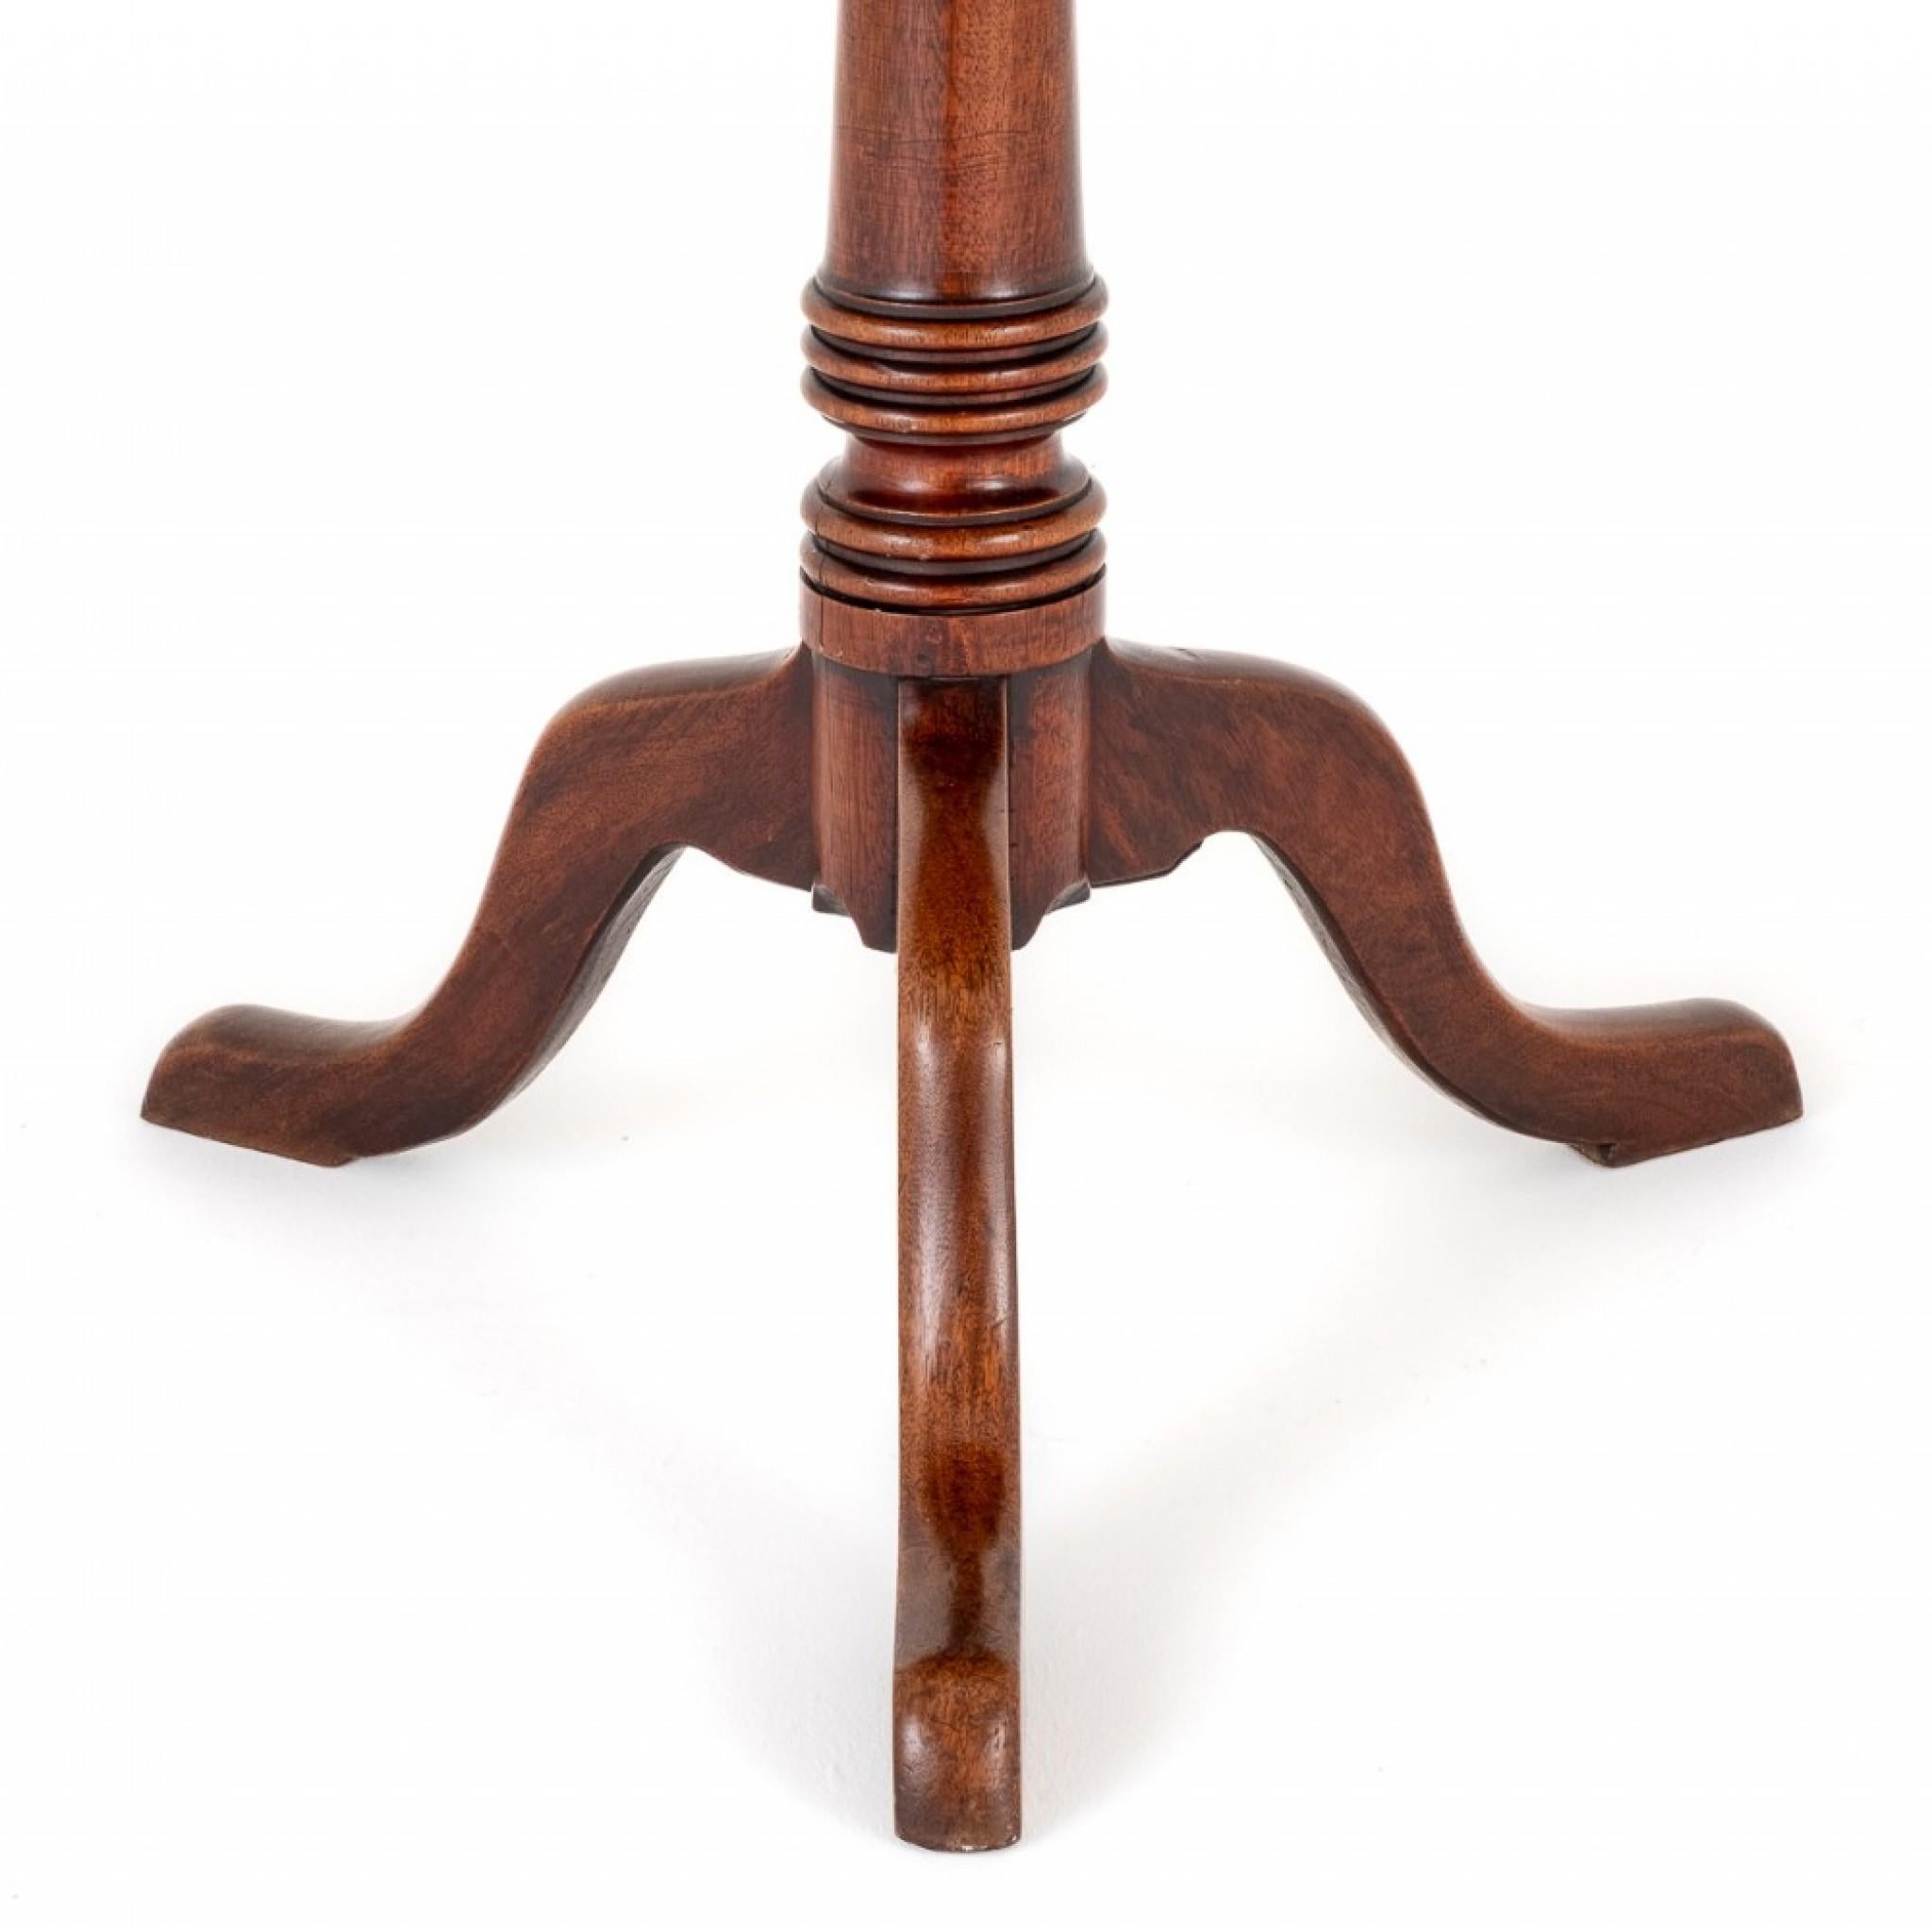 Regency mahogany snap top wine table.
Regency era.
Standing upon a shaped leg with a ring turned column.
Retaining its original brass catch.
The table is of a good colour and patina.